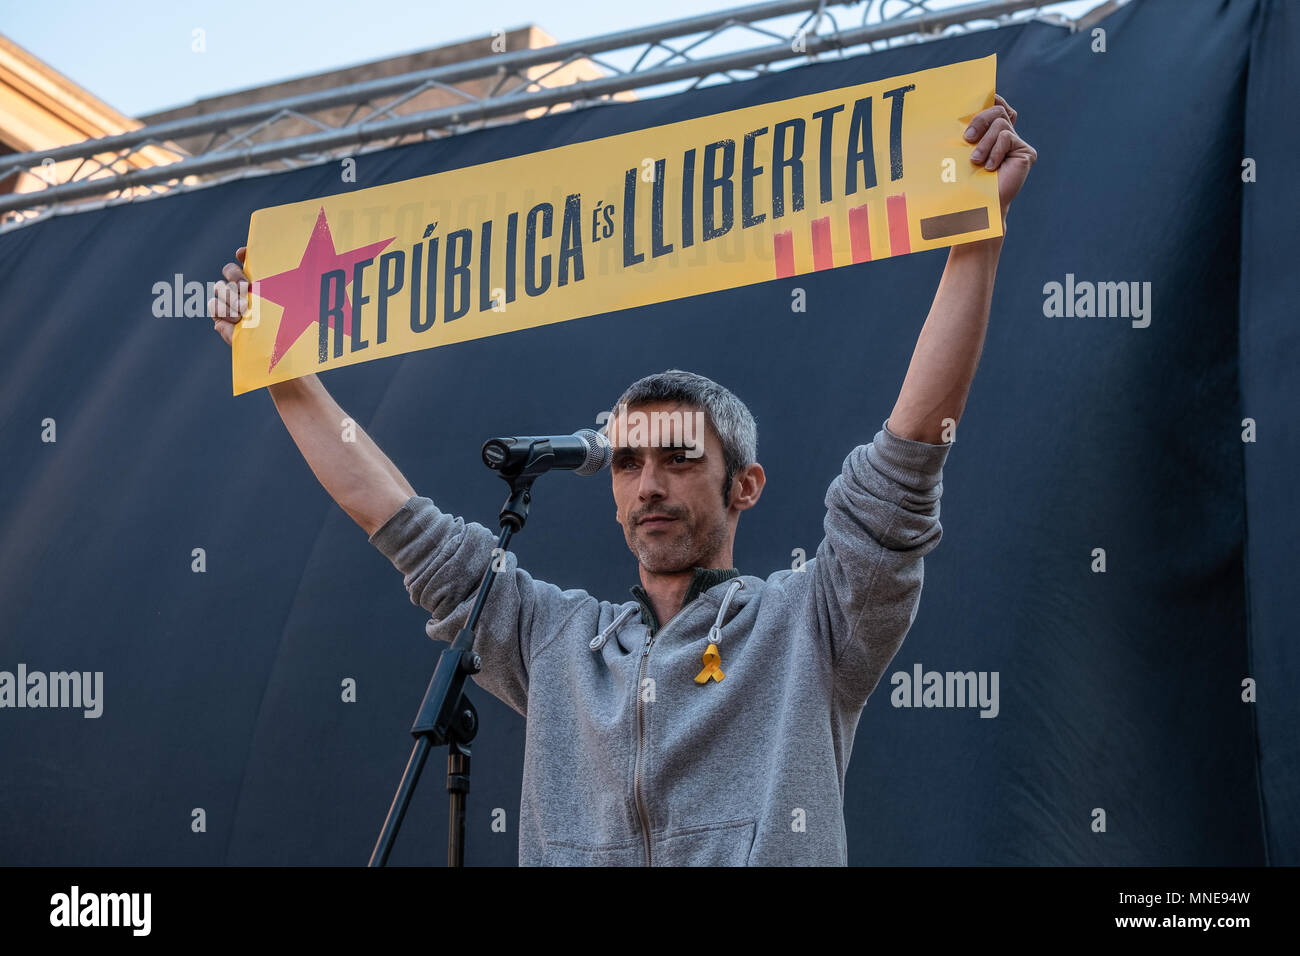 Roger Español, the young man who lost an eye during the repression of the election day of October 1 is seen on the stage raising a sign with the text 'Catalan Republic'. Act of protest to request the release of political prisoners Jordi Sànchez and Jordi Cuixart who have been in prison for seven months. It is the circumstance that it has been the first act in Catalonia of the president-elect of the Generalitat Qim Torra who has attended the rally. Stock Photo